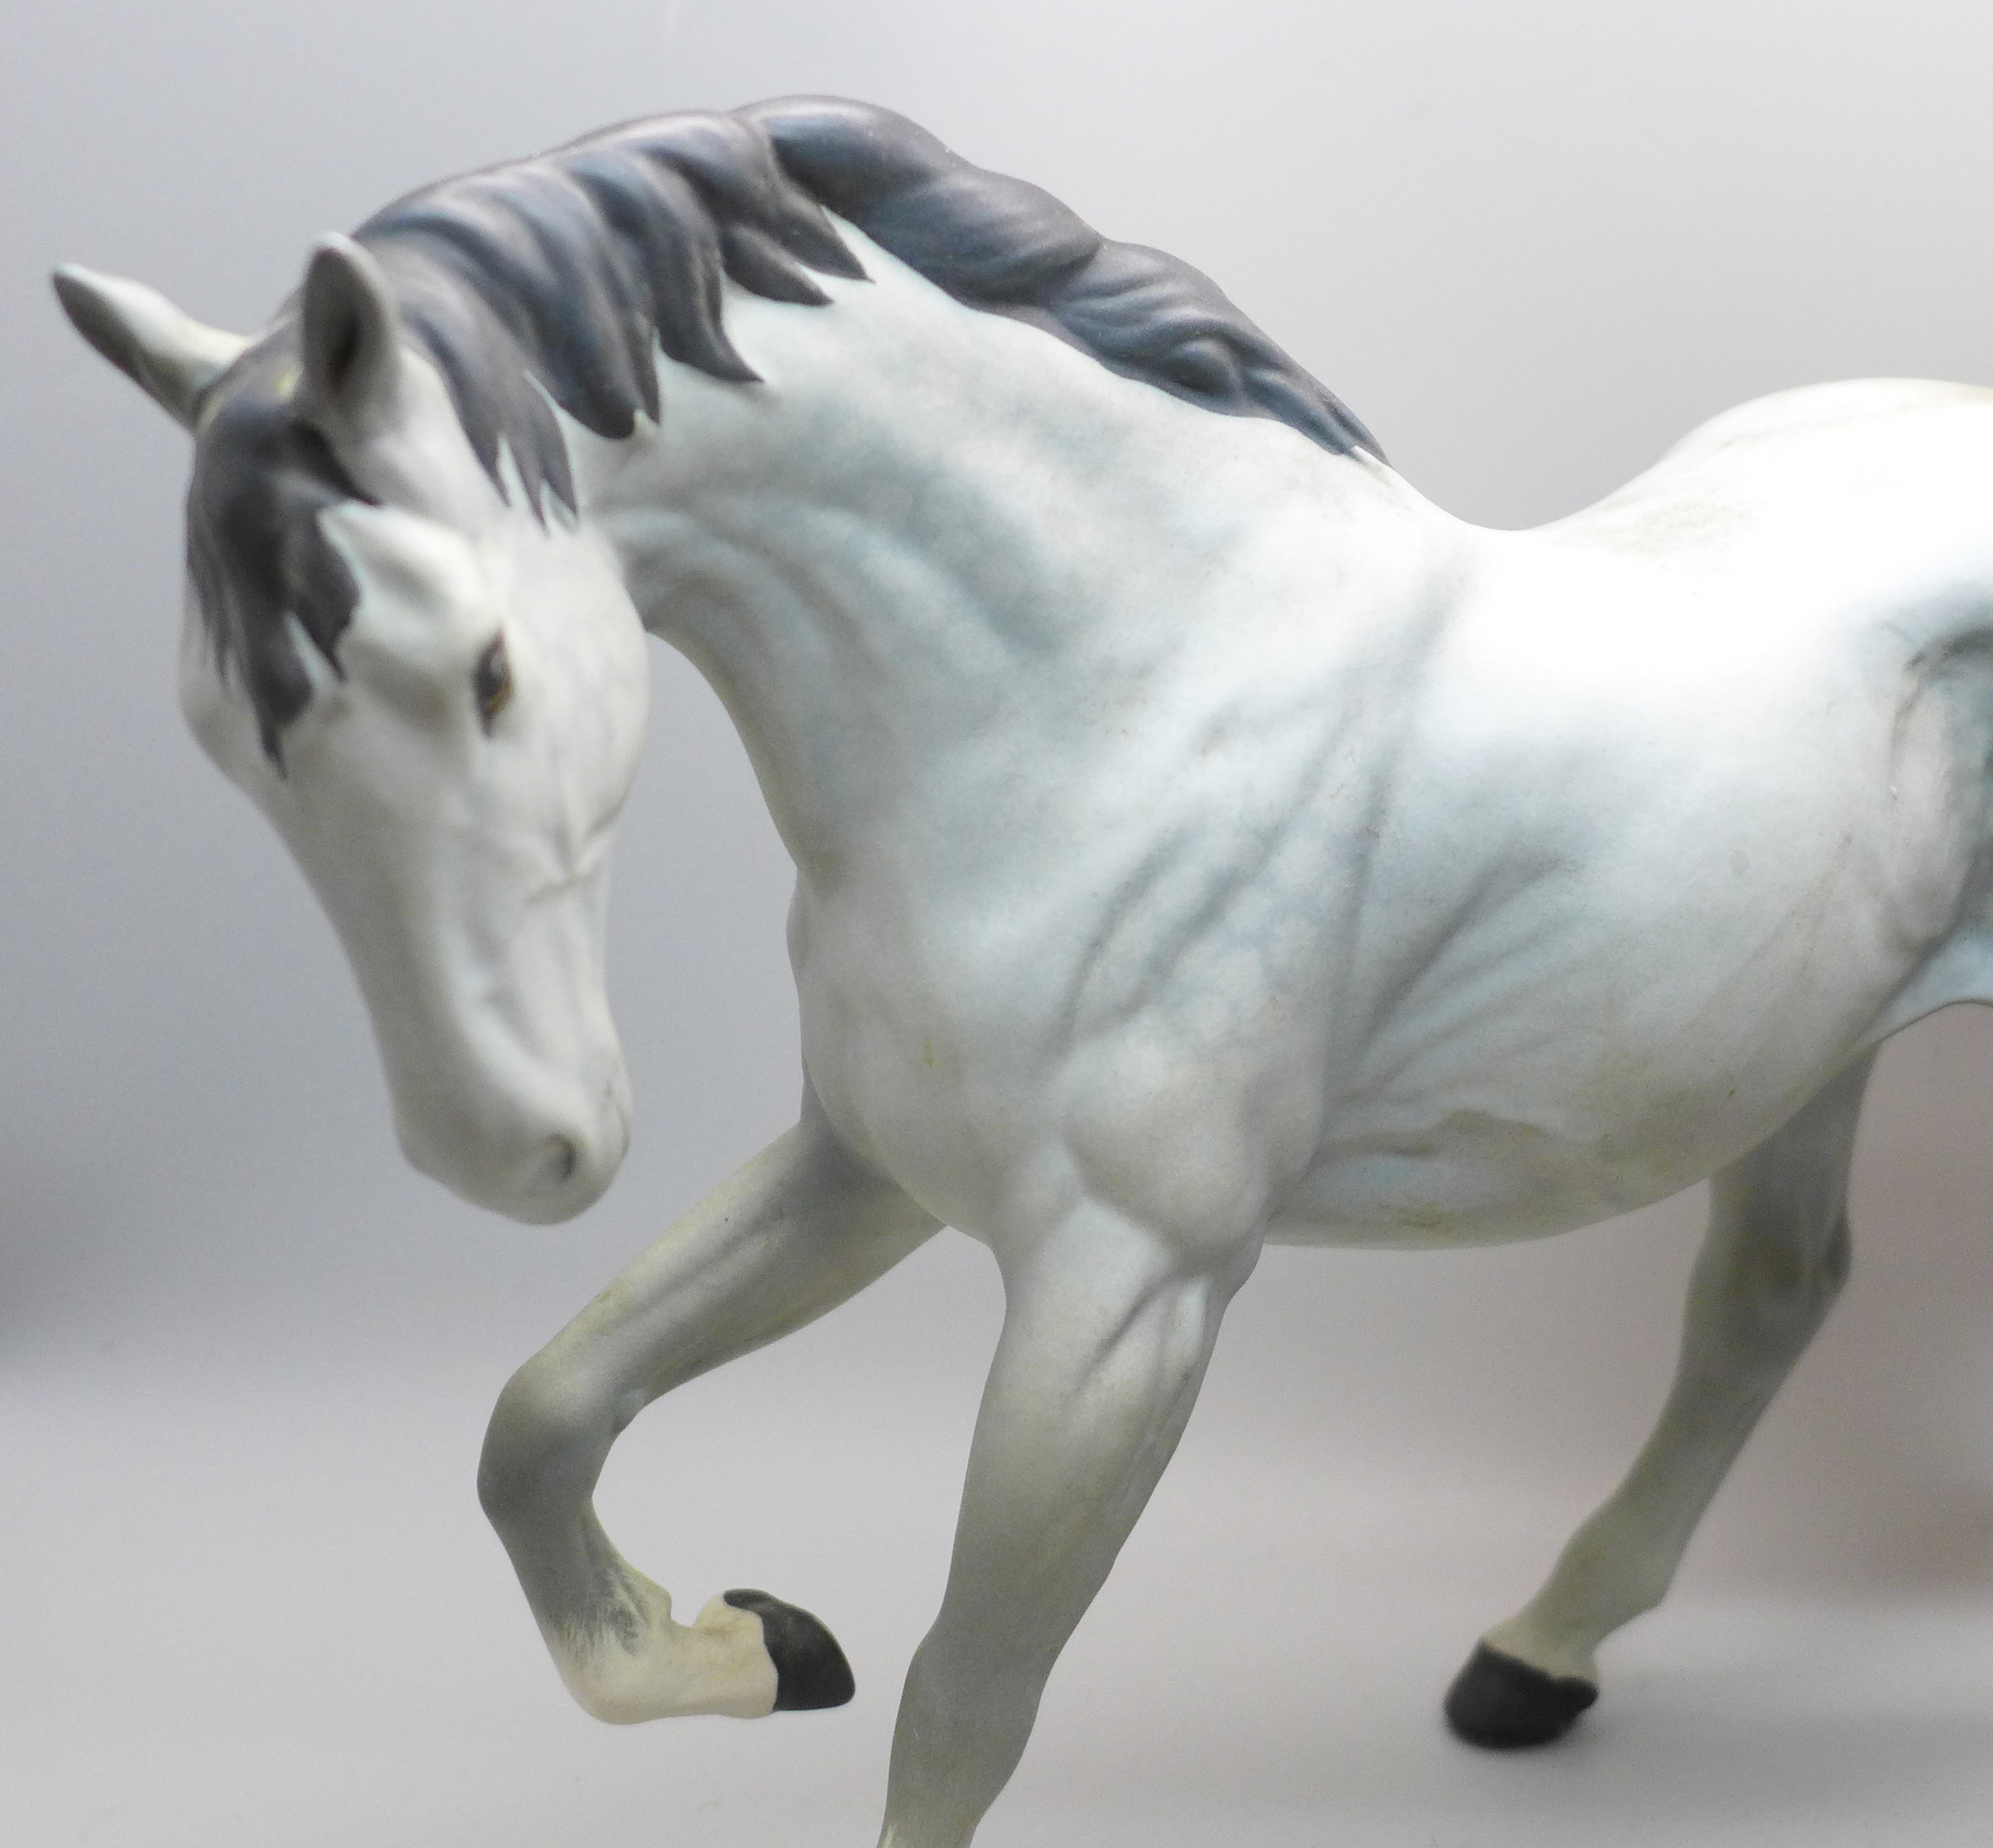 Two Beswick horse figures, hind leg on black horse restored - Image 2 of 6